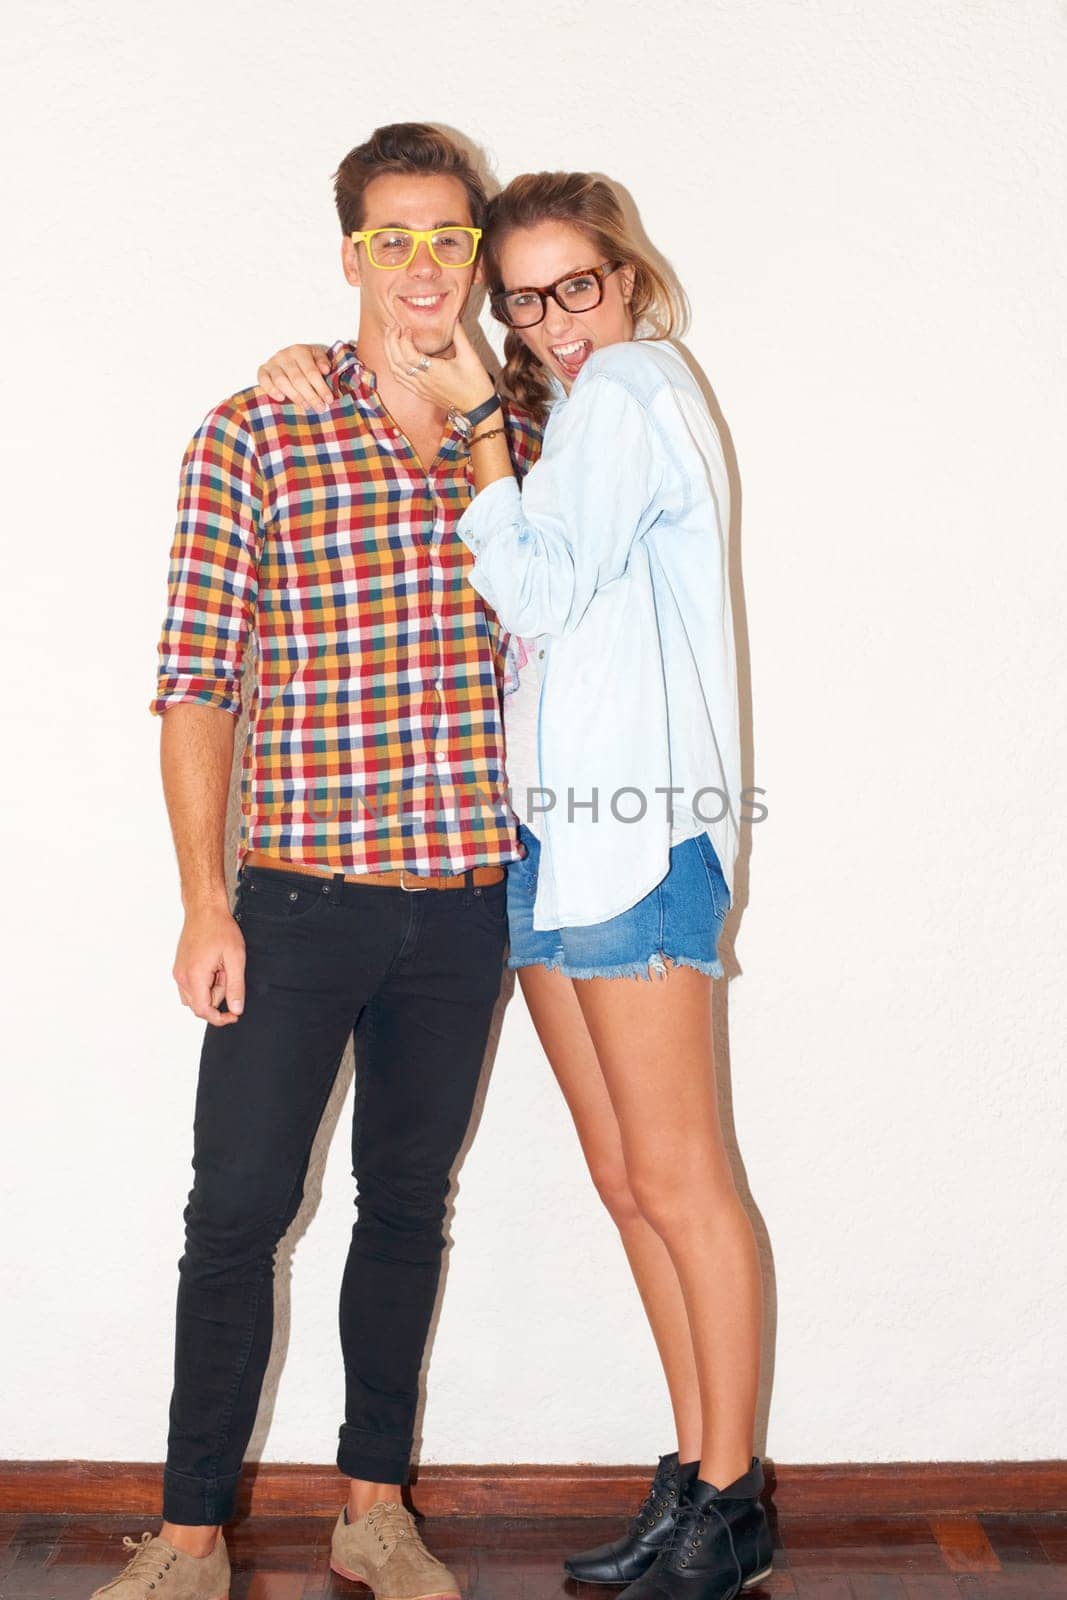 Goofy portrait of hipster couple, funny face with glasses and gen z fashion with university youth culture. Happiness, woman and man in crazy picture on fun college date with white wall background